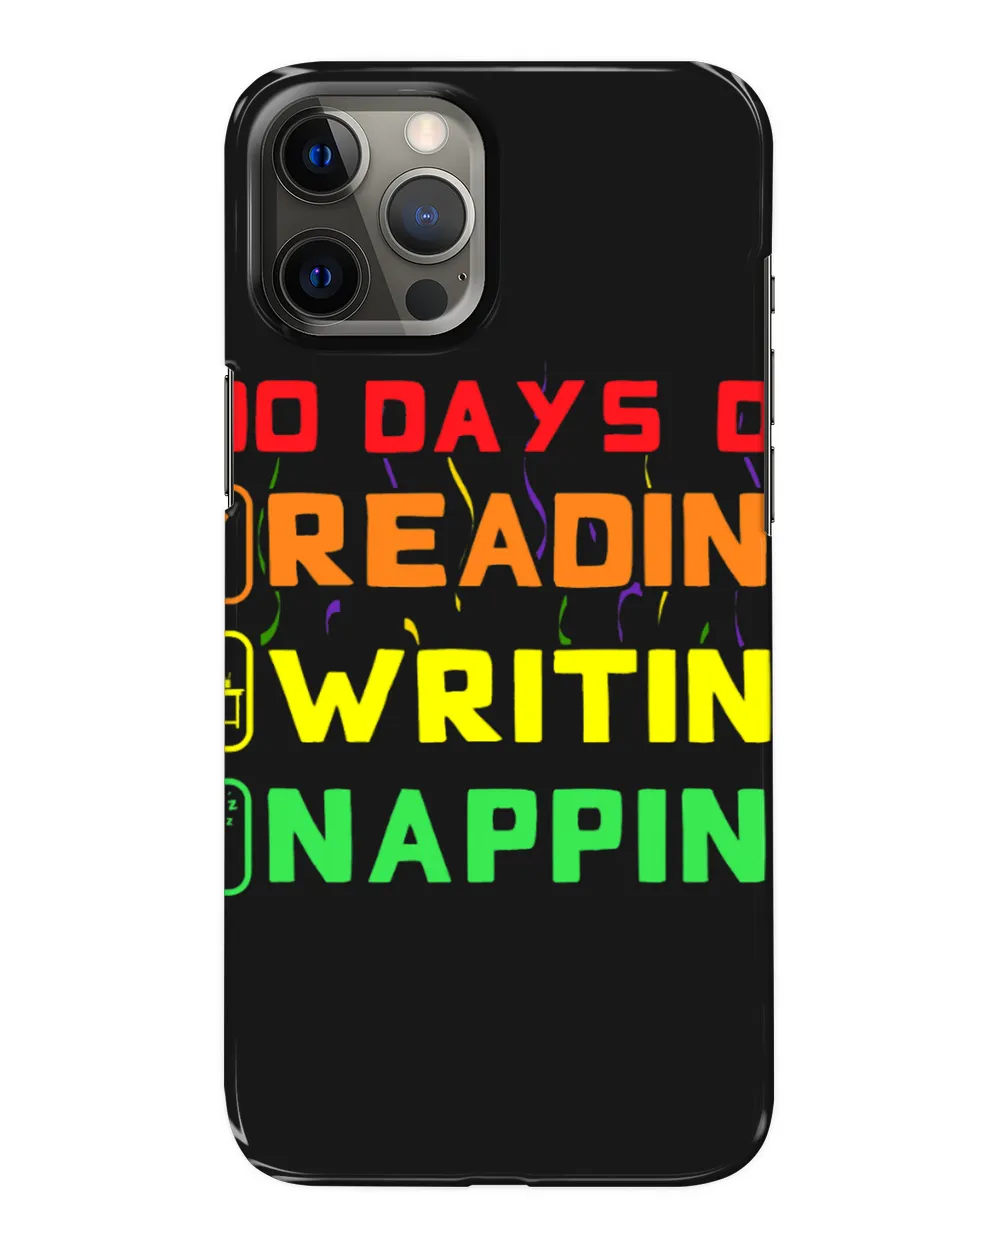 100 Days of Reading Writing 2Napping 2100 Days of School 21